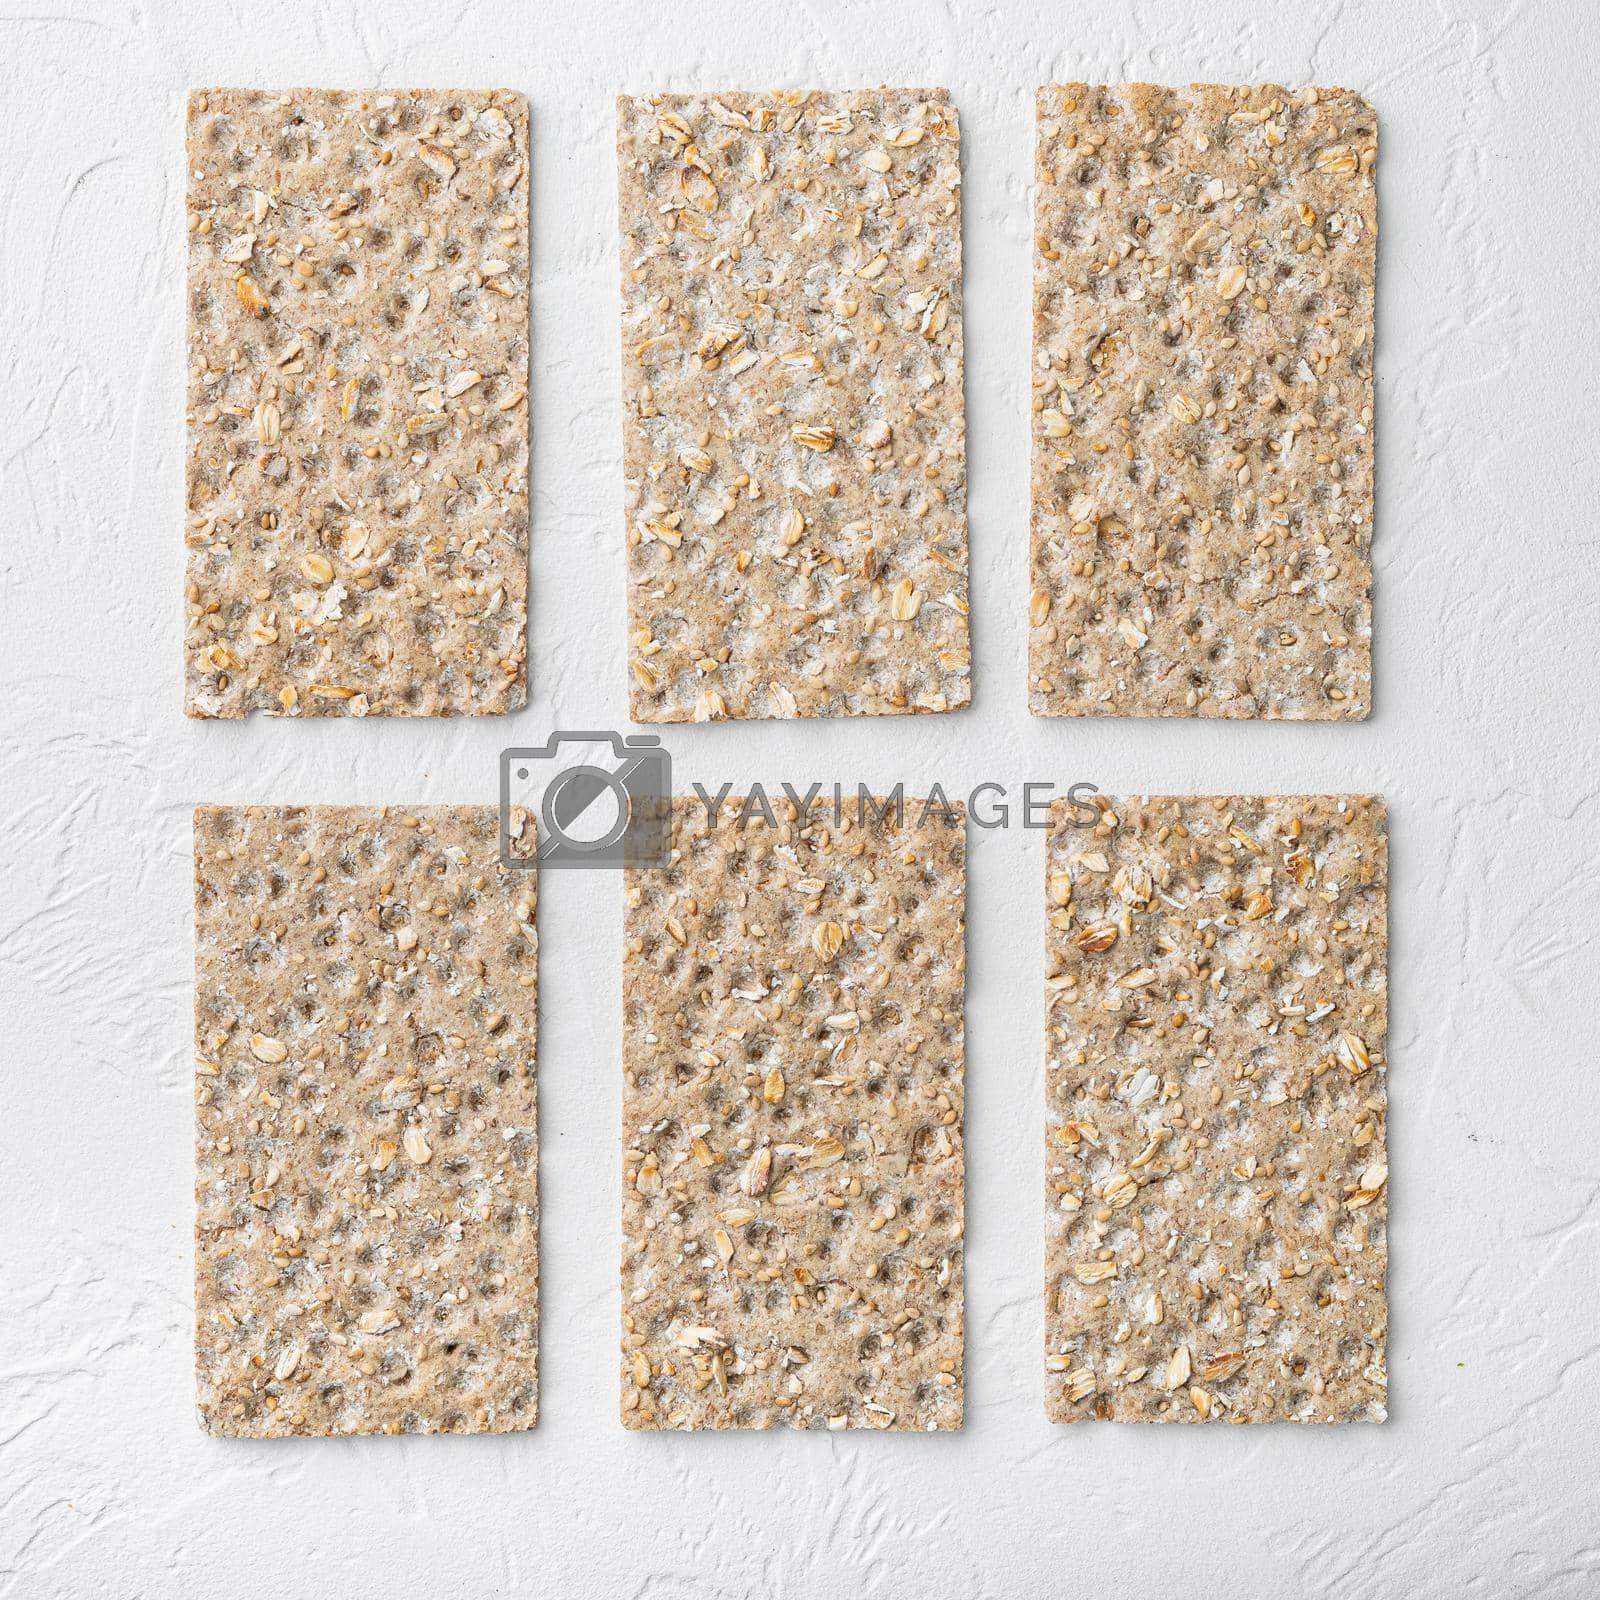 Royalty free image of Grain diet light crisp bread, square format , on white stone table background, top view flat lay, with copy space for text by Ilianesolenyi